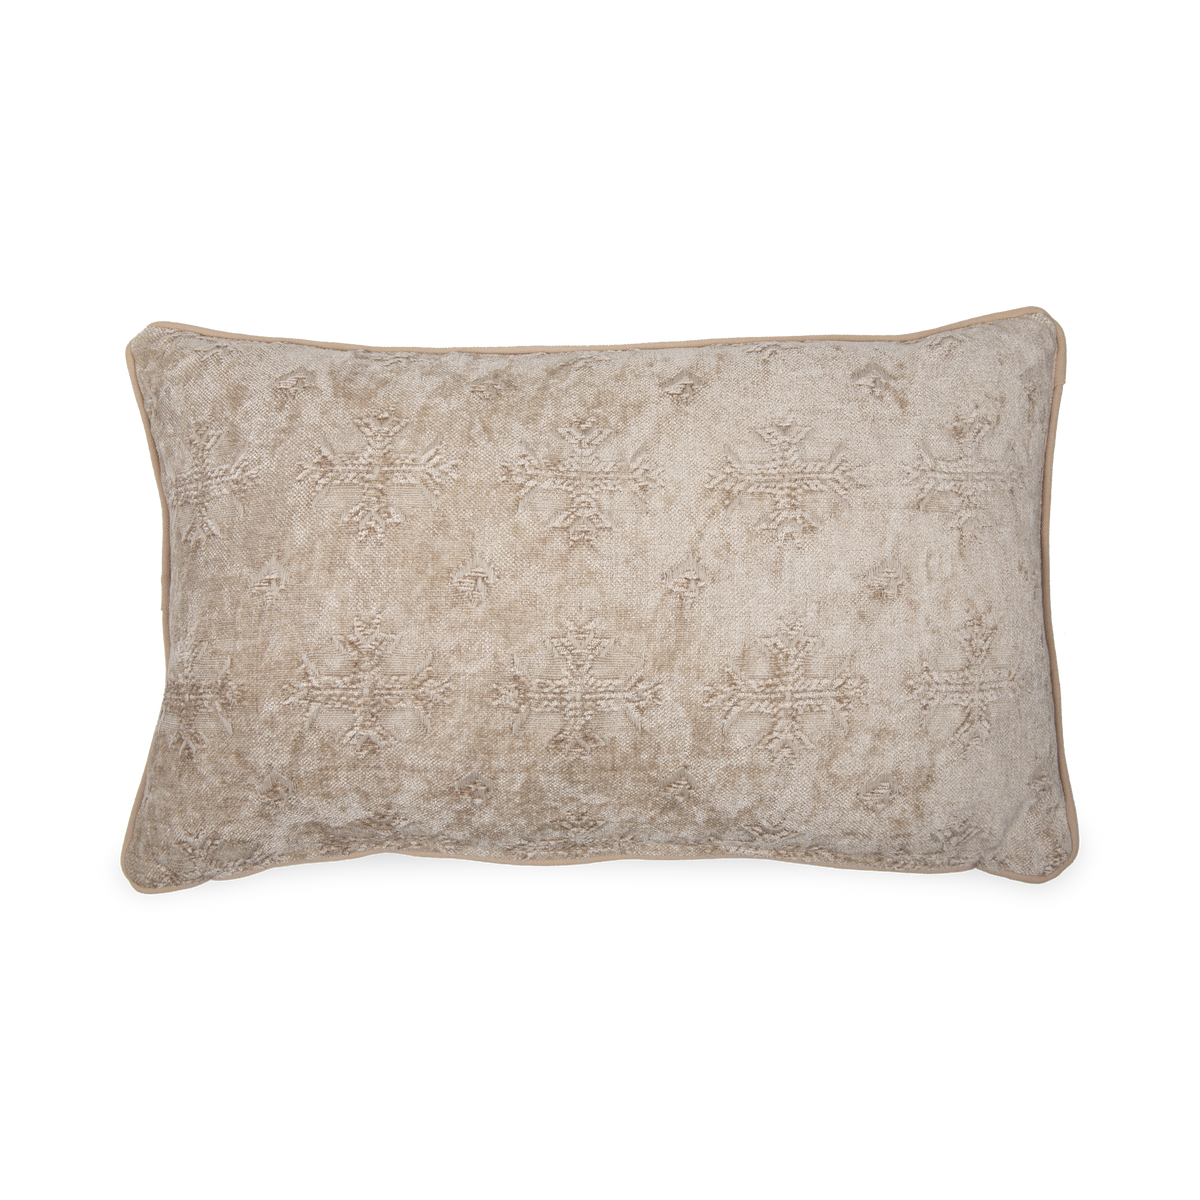 The Chenille Jacquard Pillow features elegant intricate patterns that adorn this soft, textured pillow.